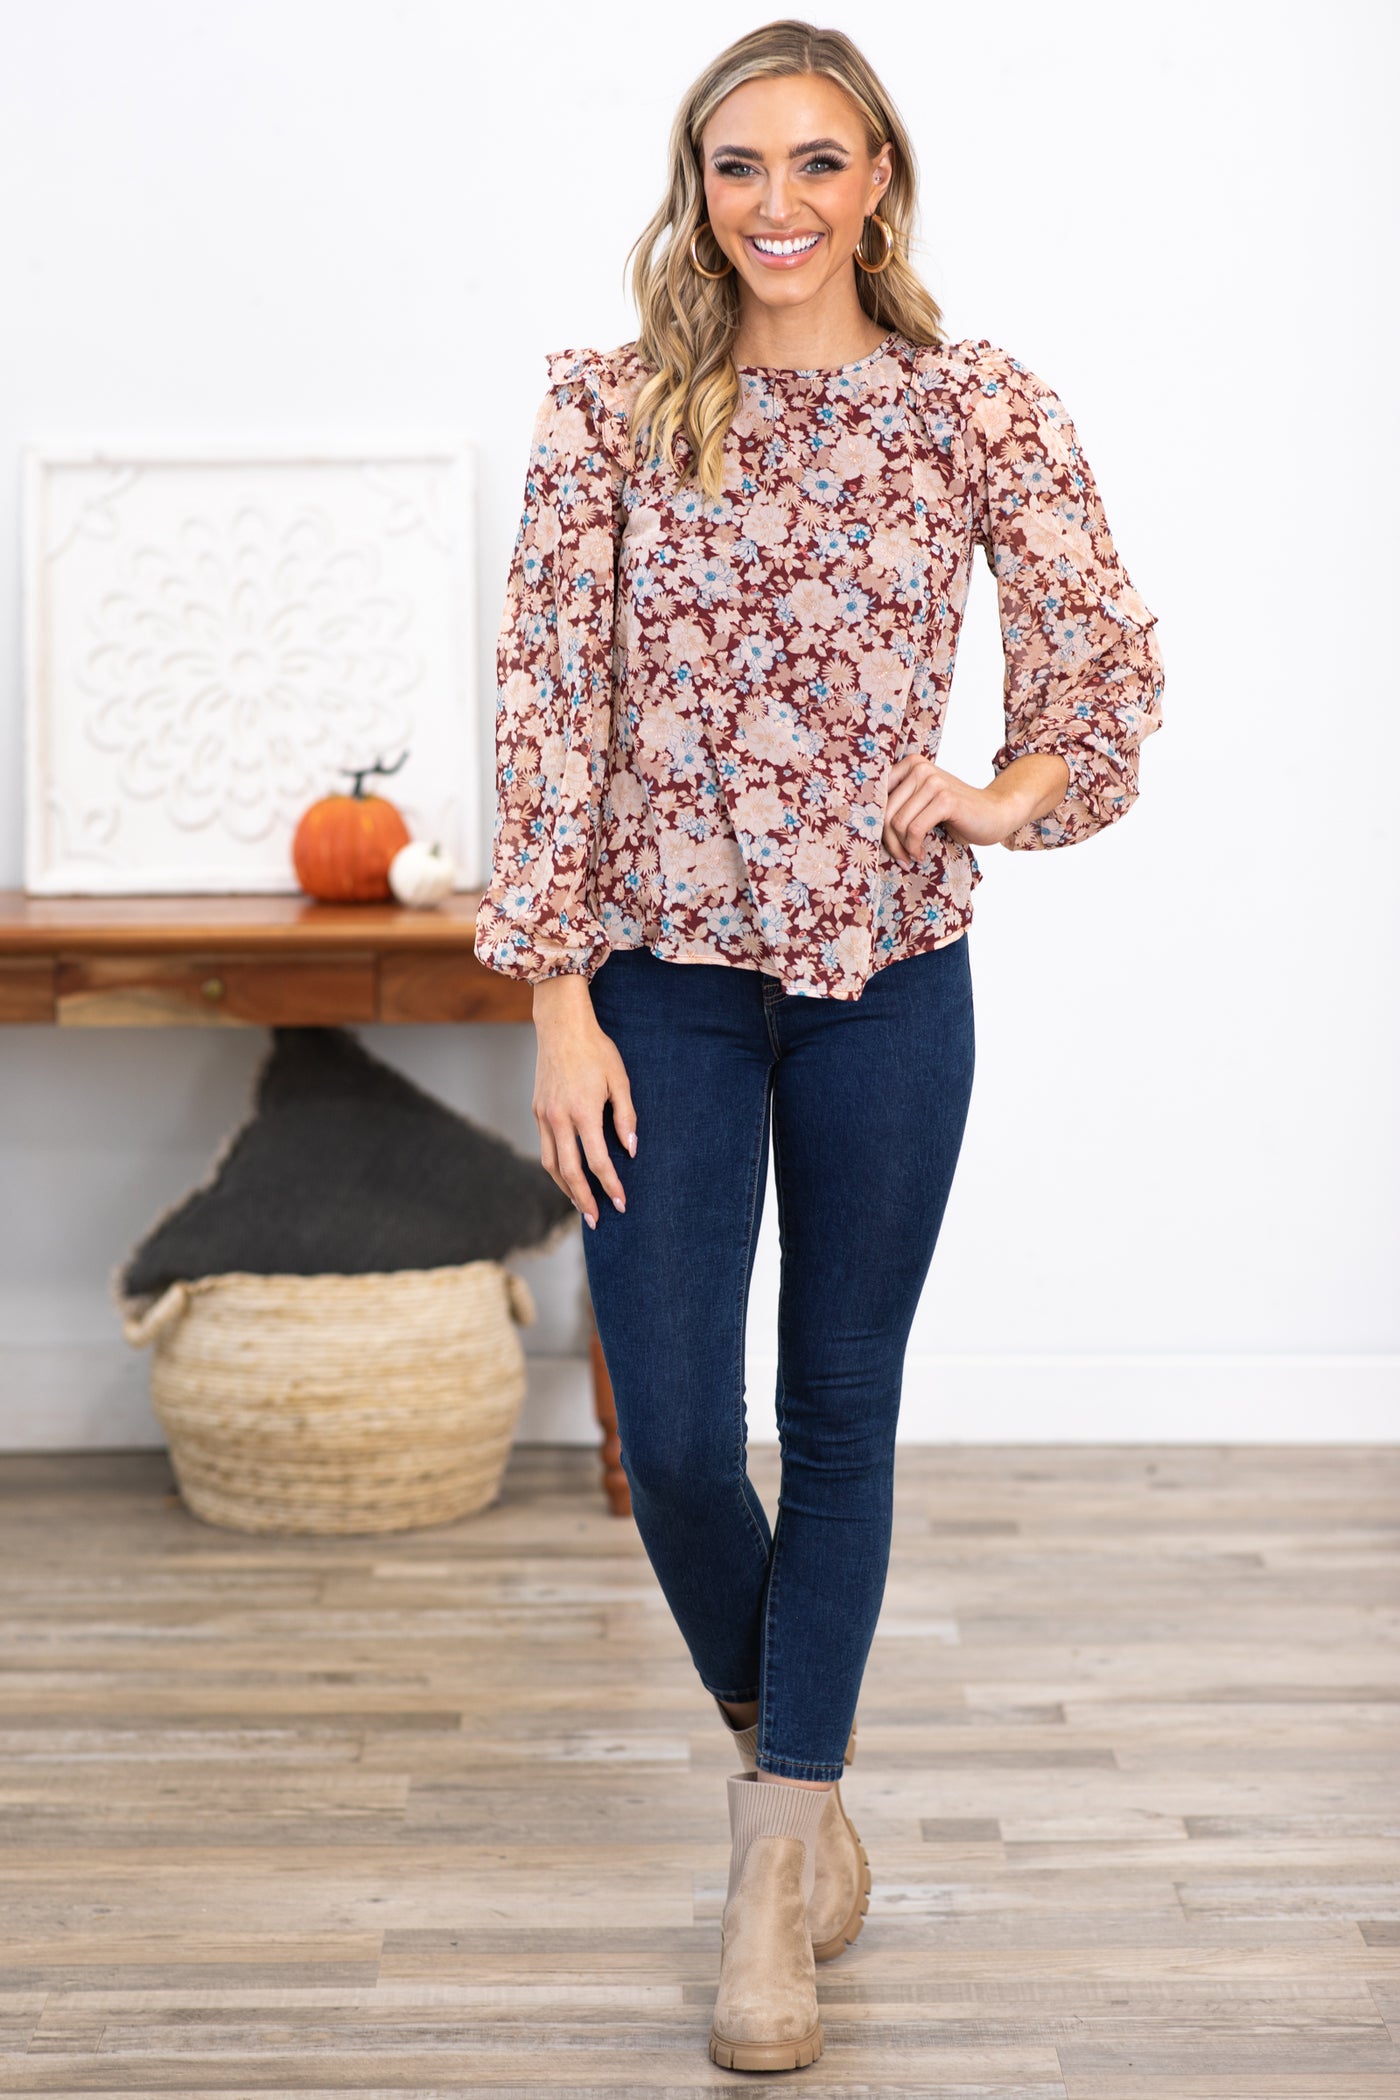 Wine and Tan Floral Top With Ruffle Trim